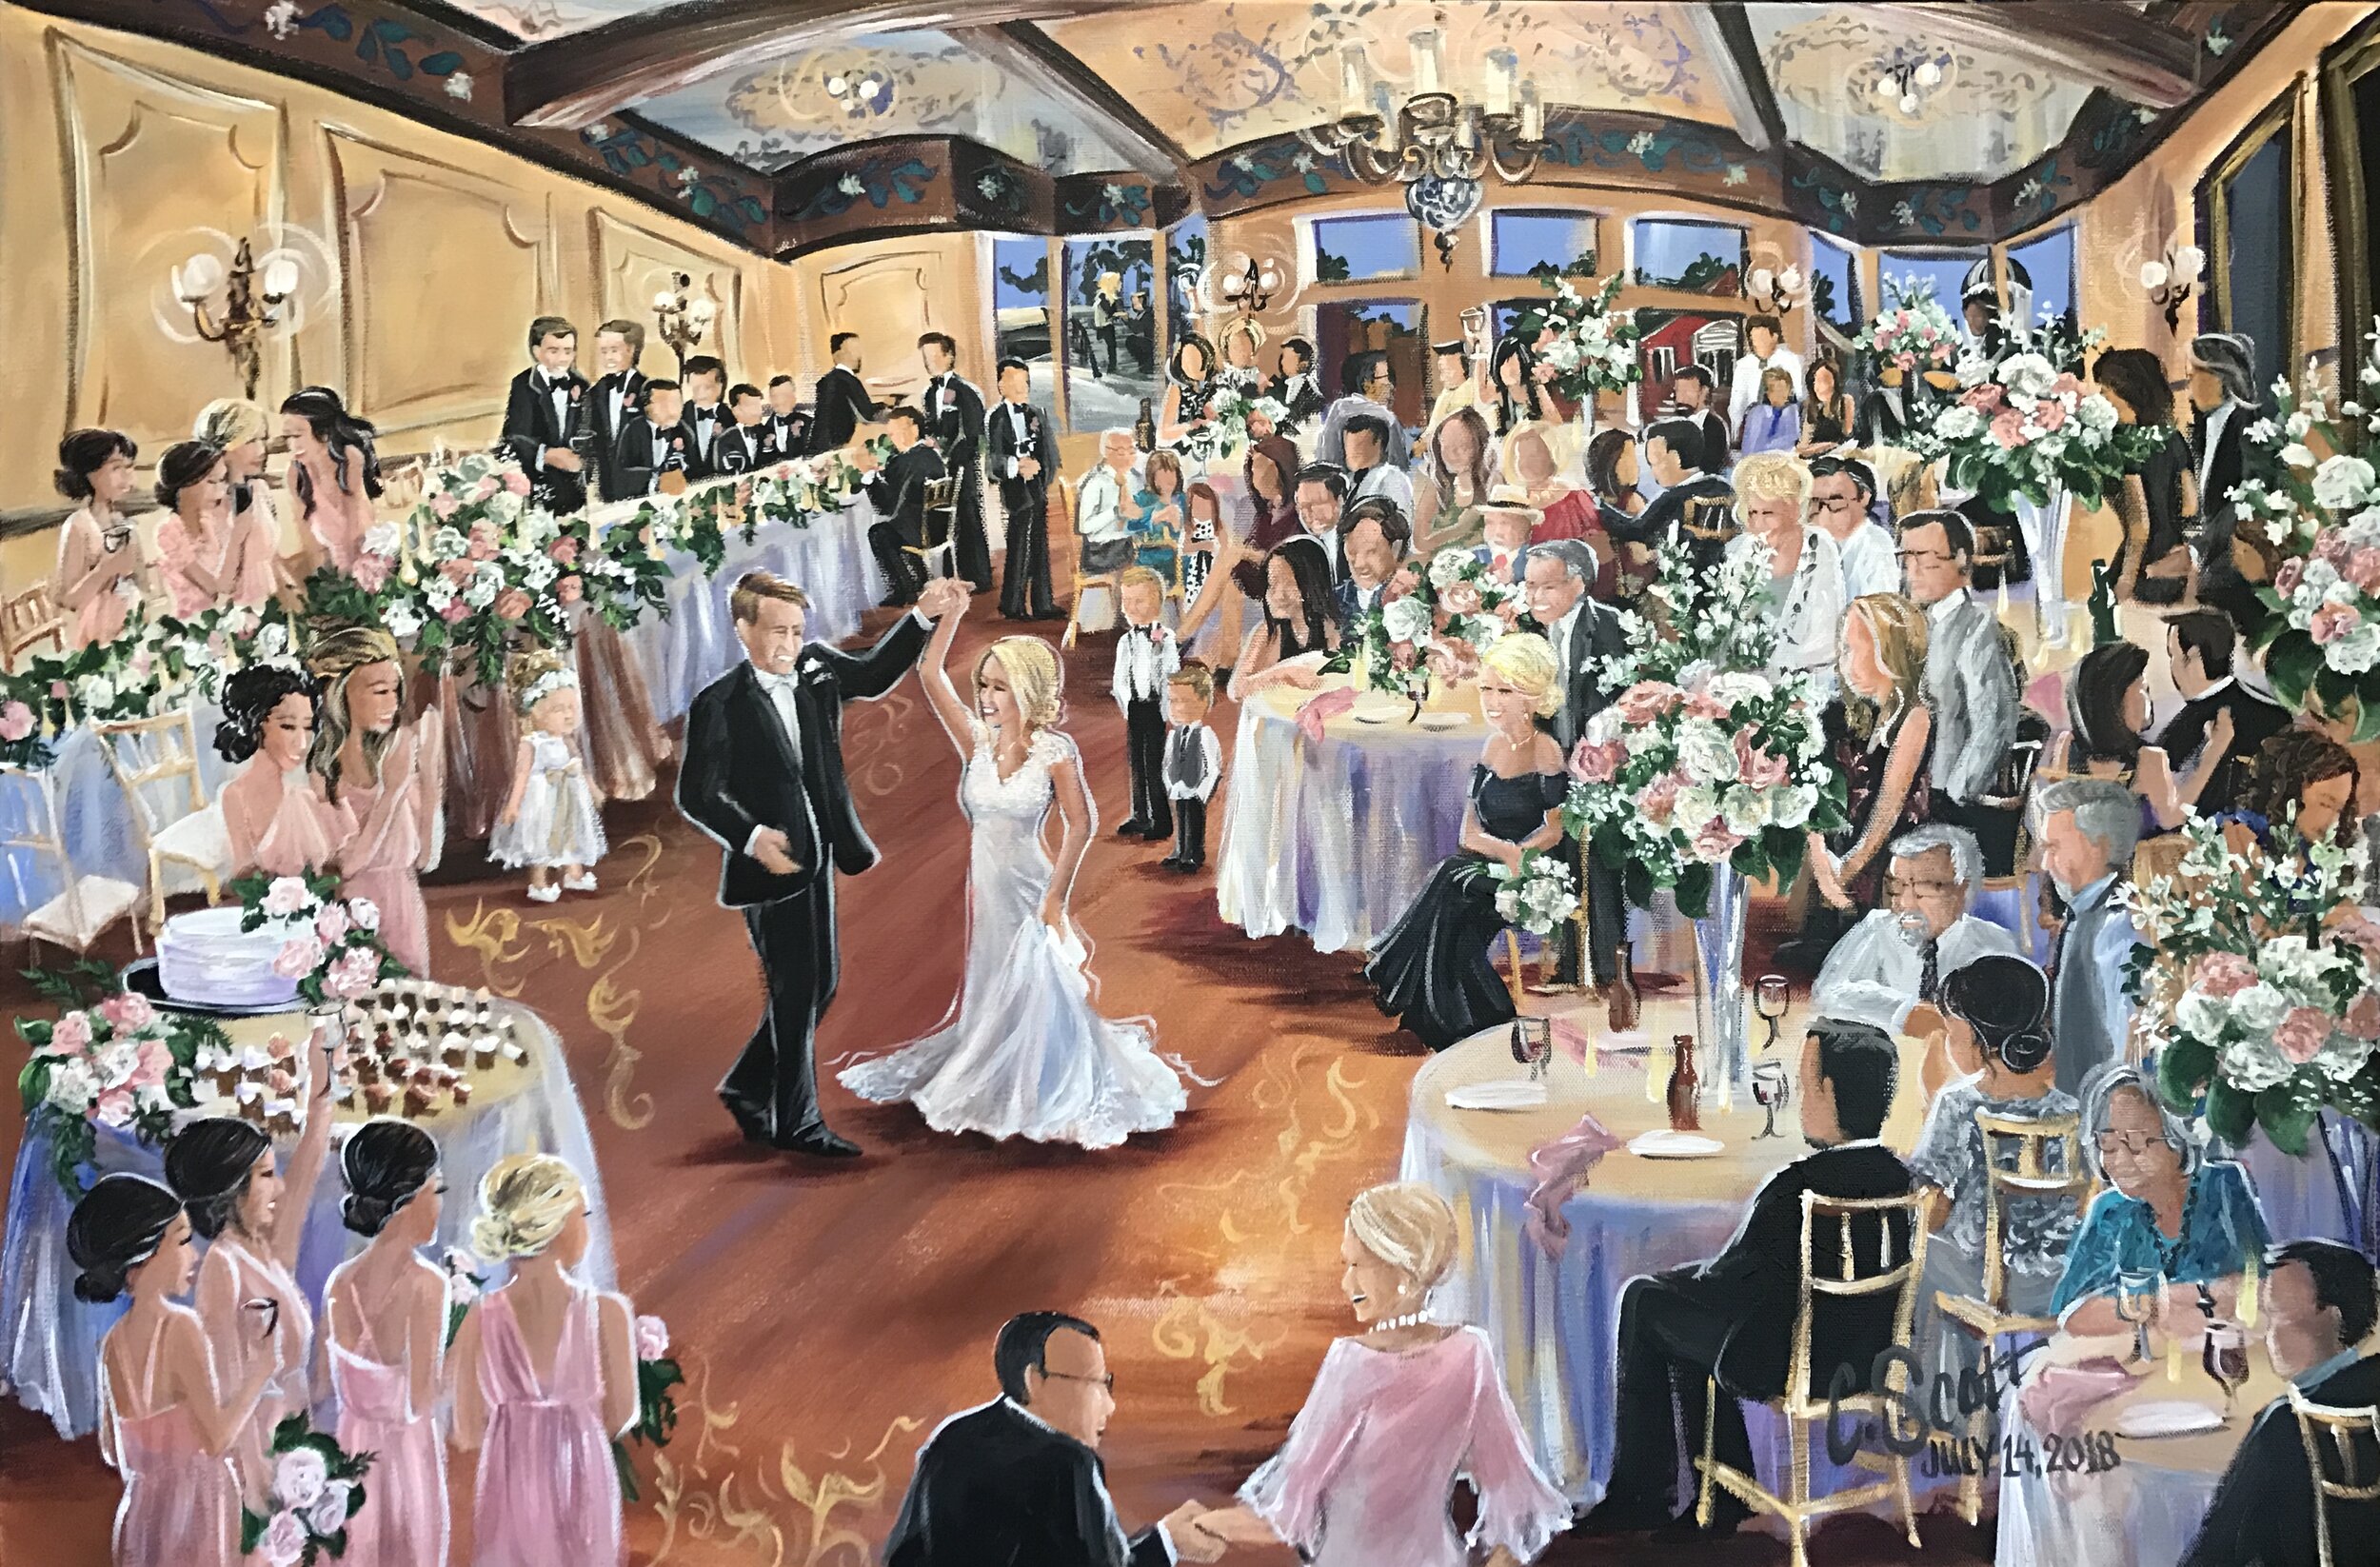 Painted BOTH onsite and in the studio after the event.  There are approximately 50 recognizable people in this 24x36 canvas, the work onsite totaled approx 7 hours, and photos were provided for additional detail.